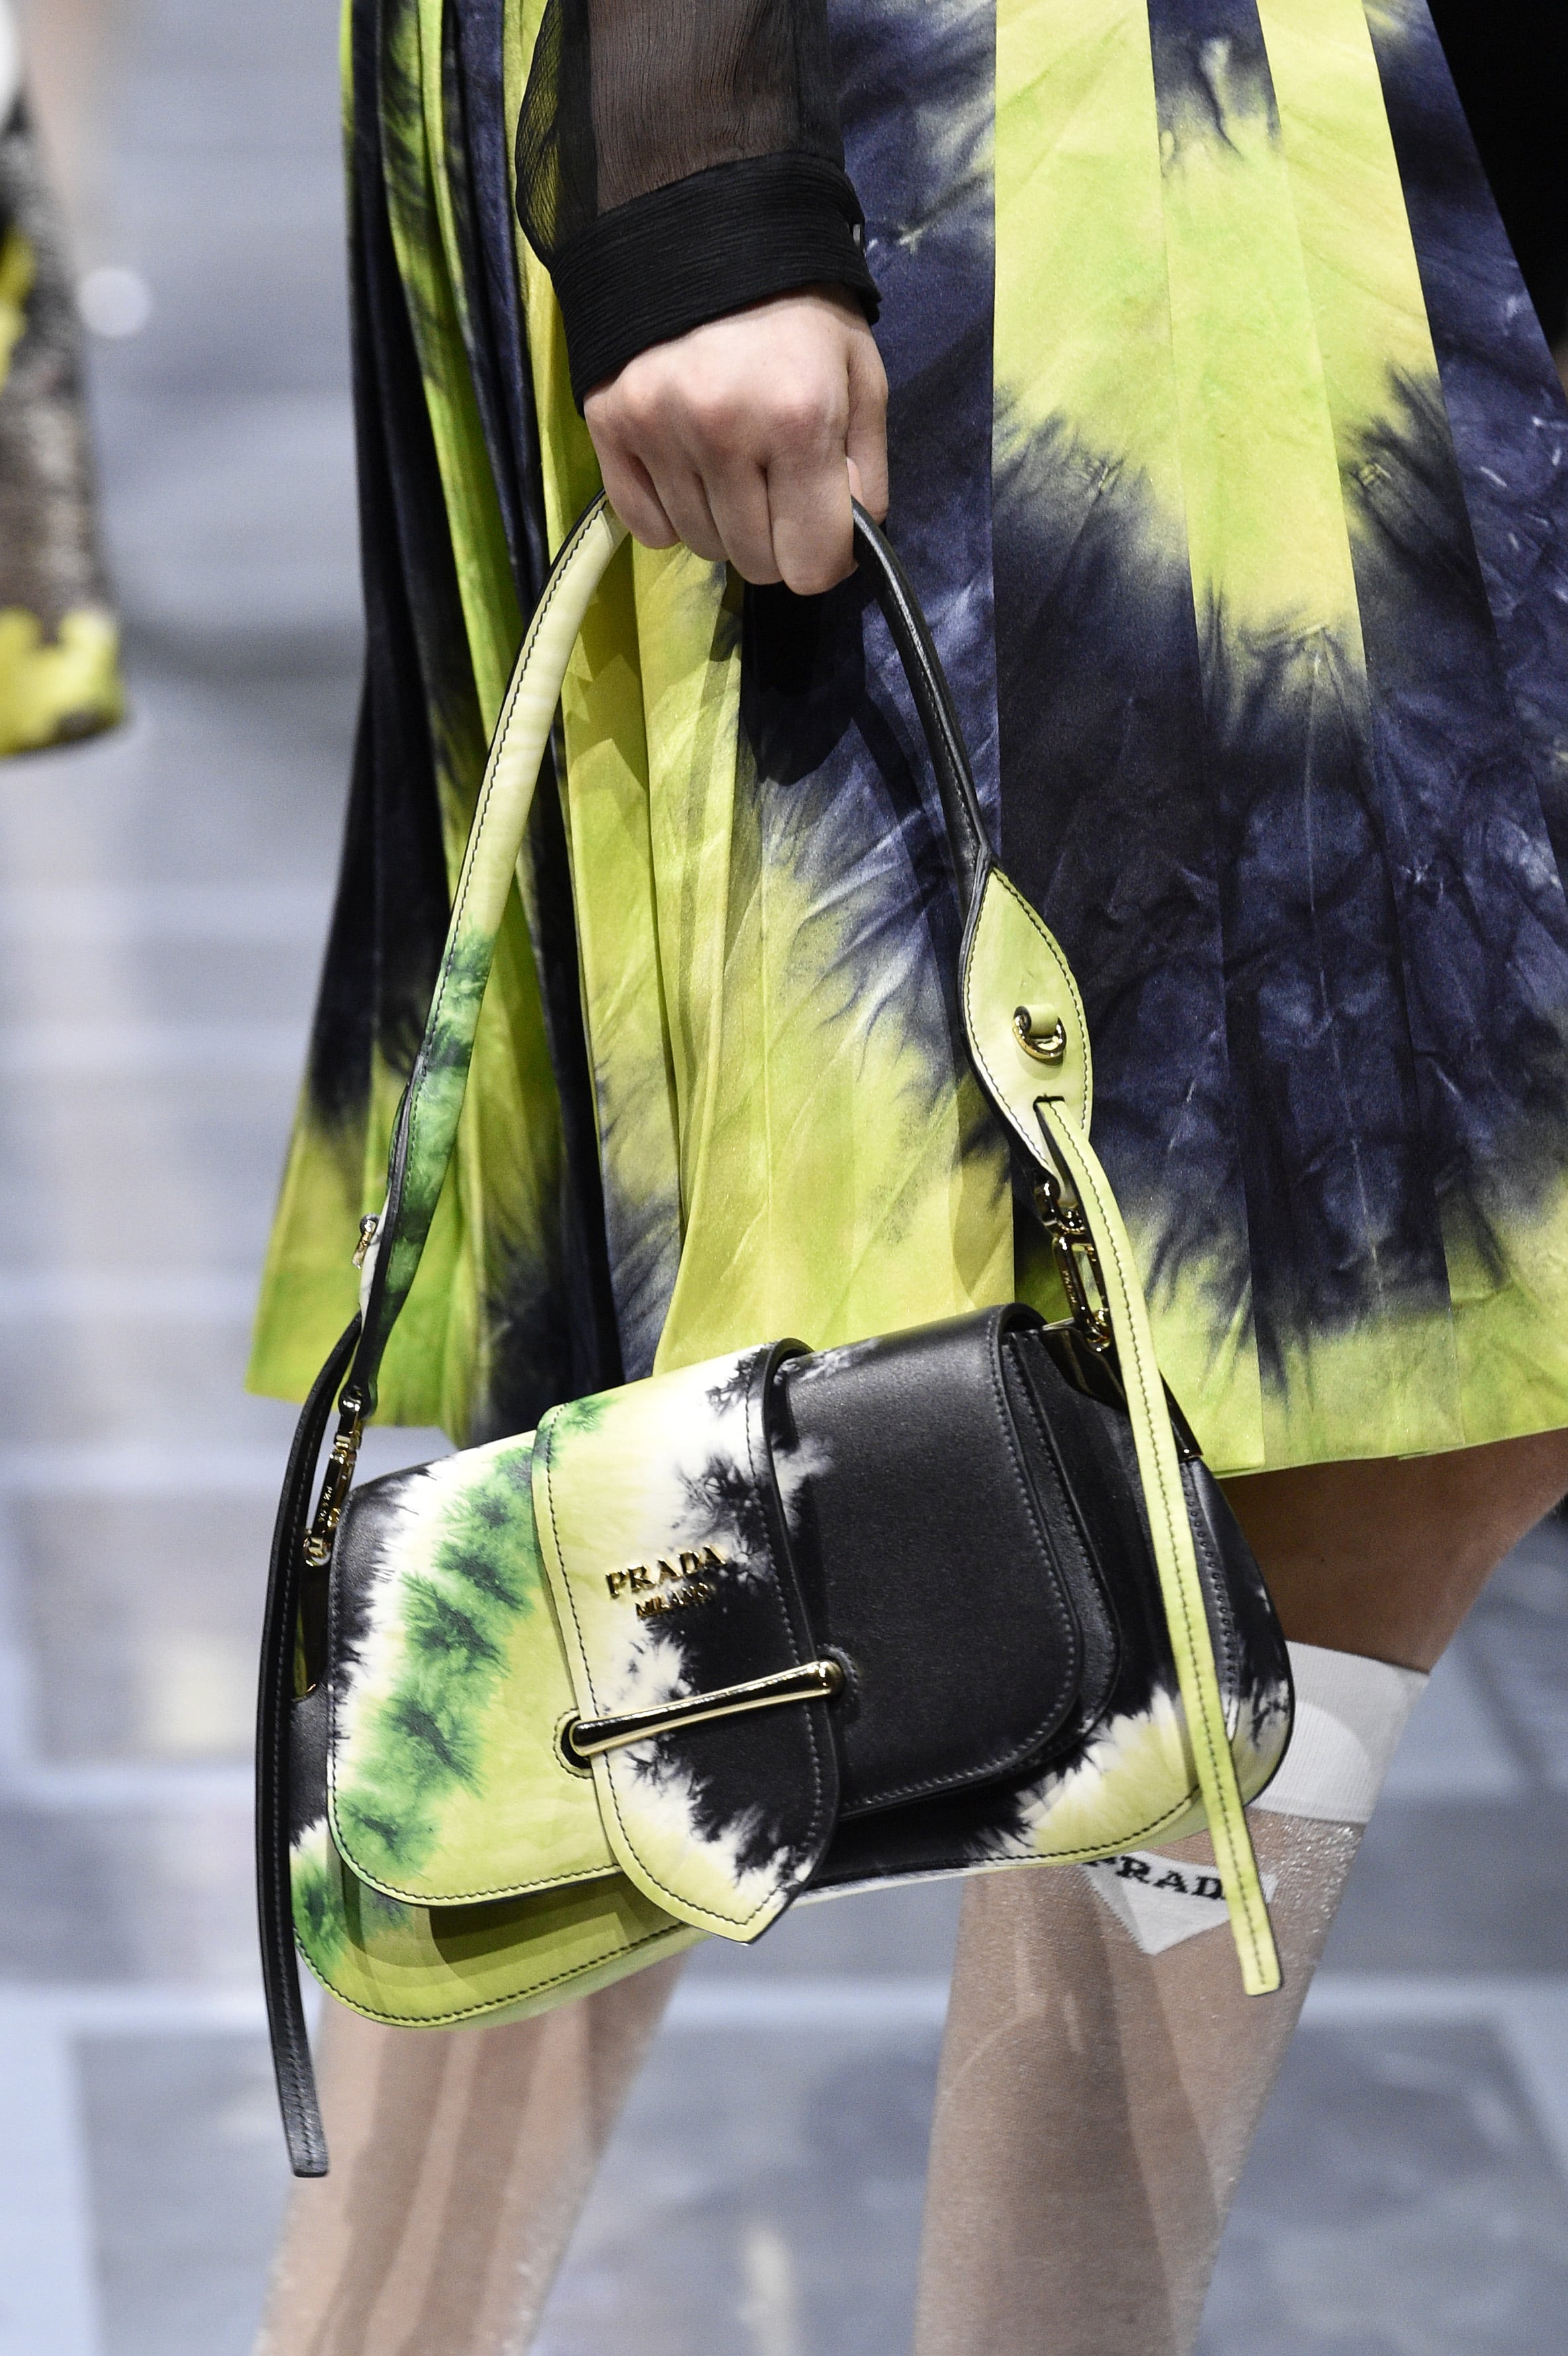 Tie-Dye Makes A Comeback With These Louis Vuitton And Prada